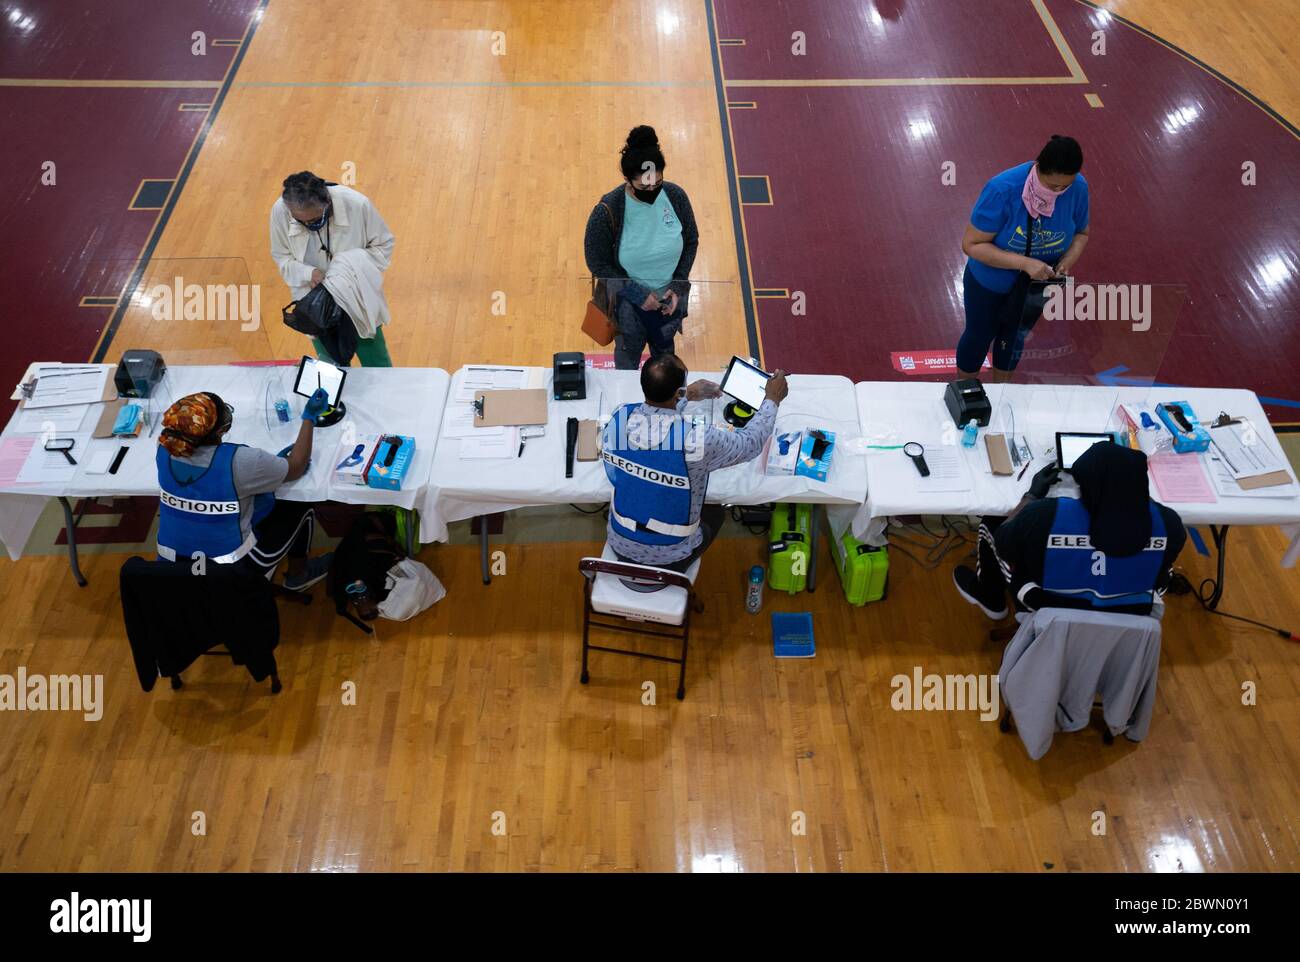 Washington, United States. 02nd June, 2020. Voters wait to check in during the DC primary election at a polling location in Washington, DC on Tuesday, June 2, 2020. Seven states are holding Primaries today amid the COVID-19 pandemic that has killed more than 103,000 people in the United States. Photo by Kevin Dietsch/UPI Credit: UPI/Alamy Live News Stock Photo